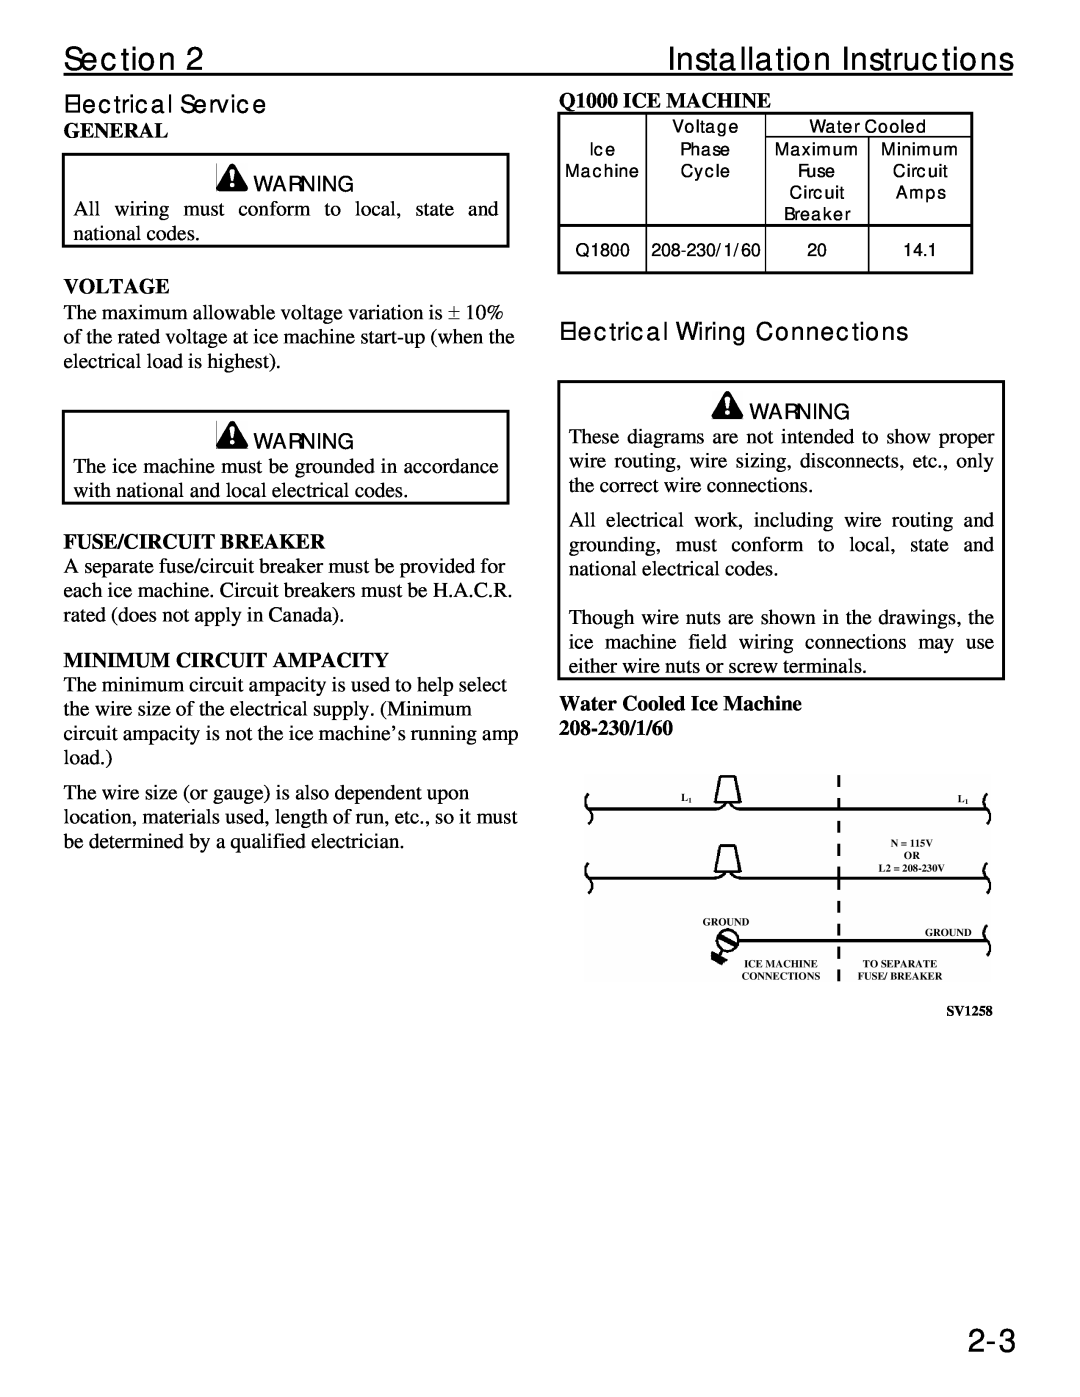 Manitowoc Ice Q 1800 manual Installation Instructions, Electrical Service, Electrical Wiring Connections, Voltage, Section 